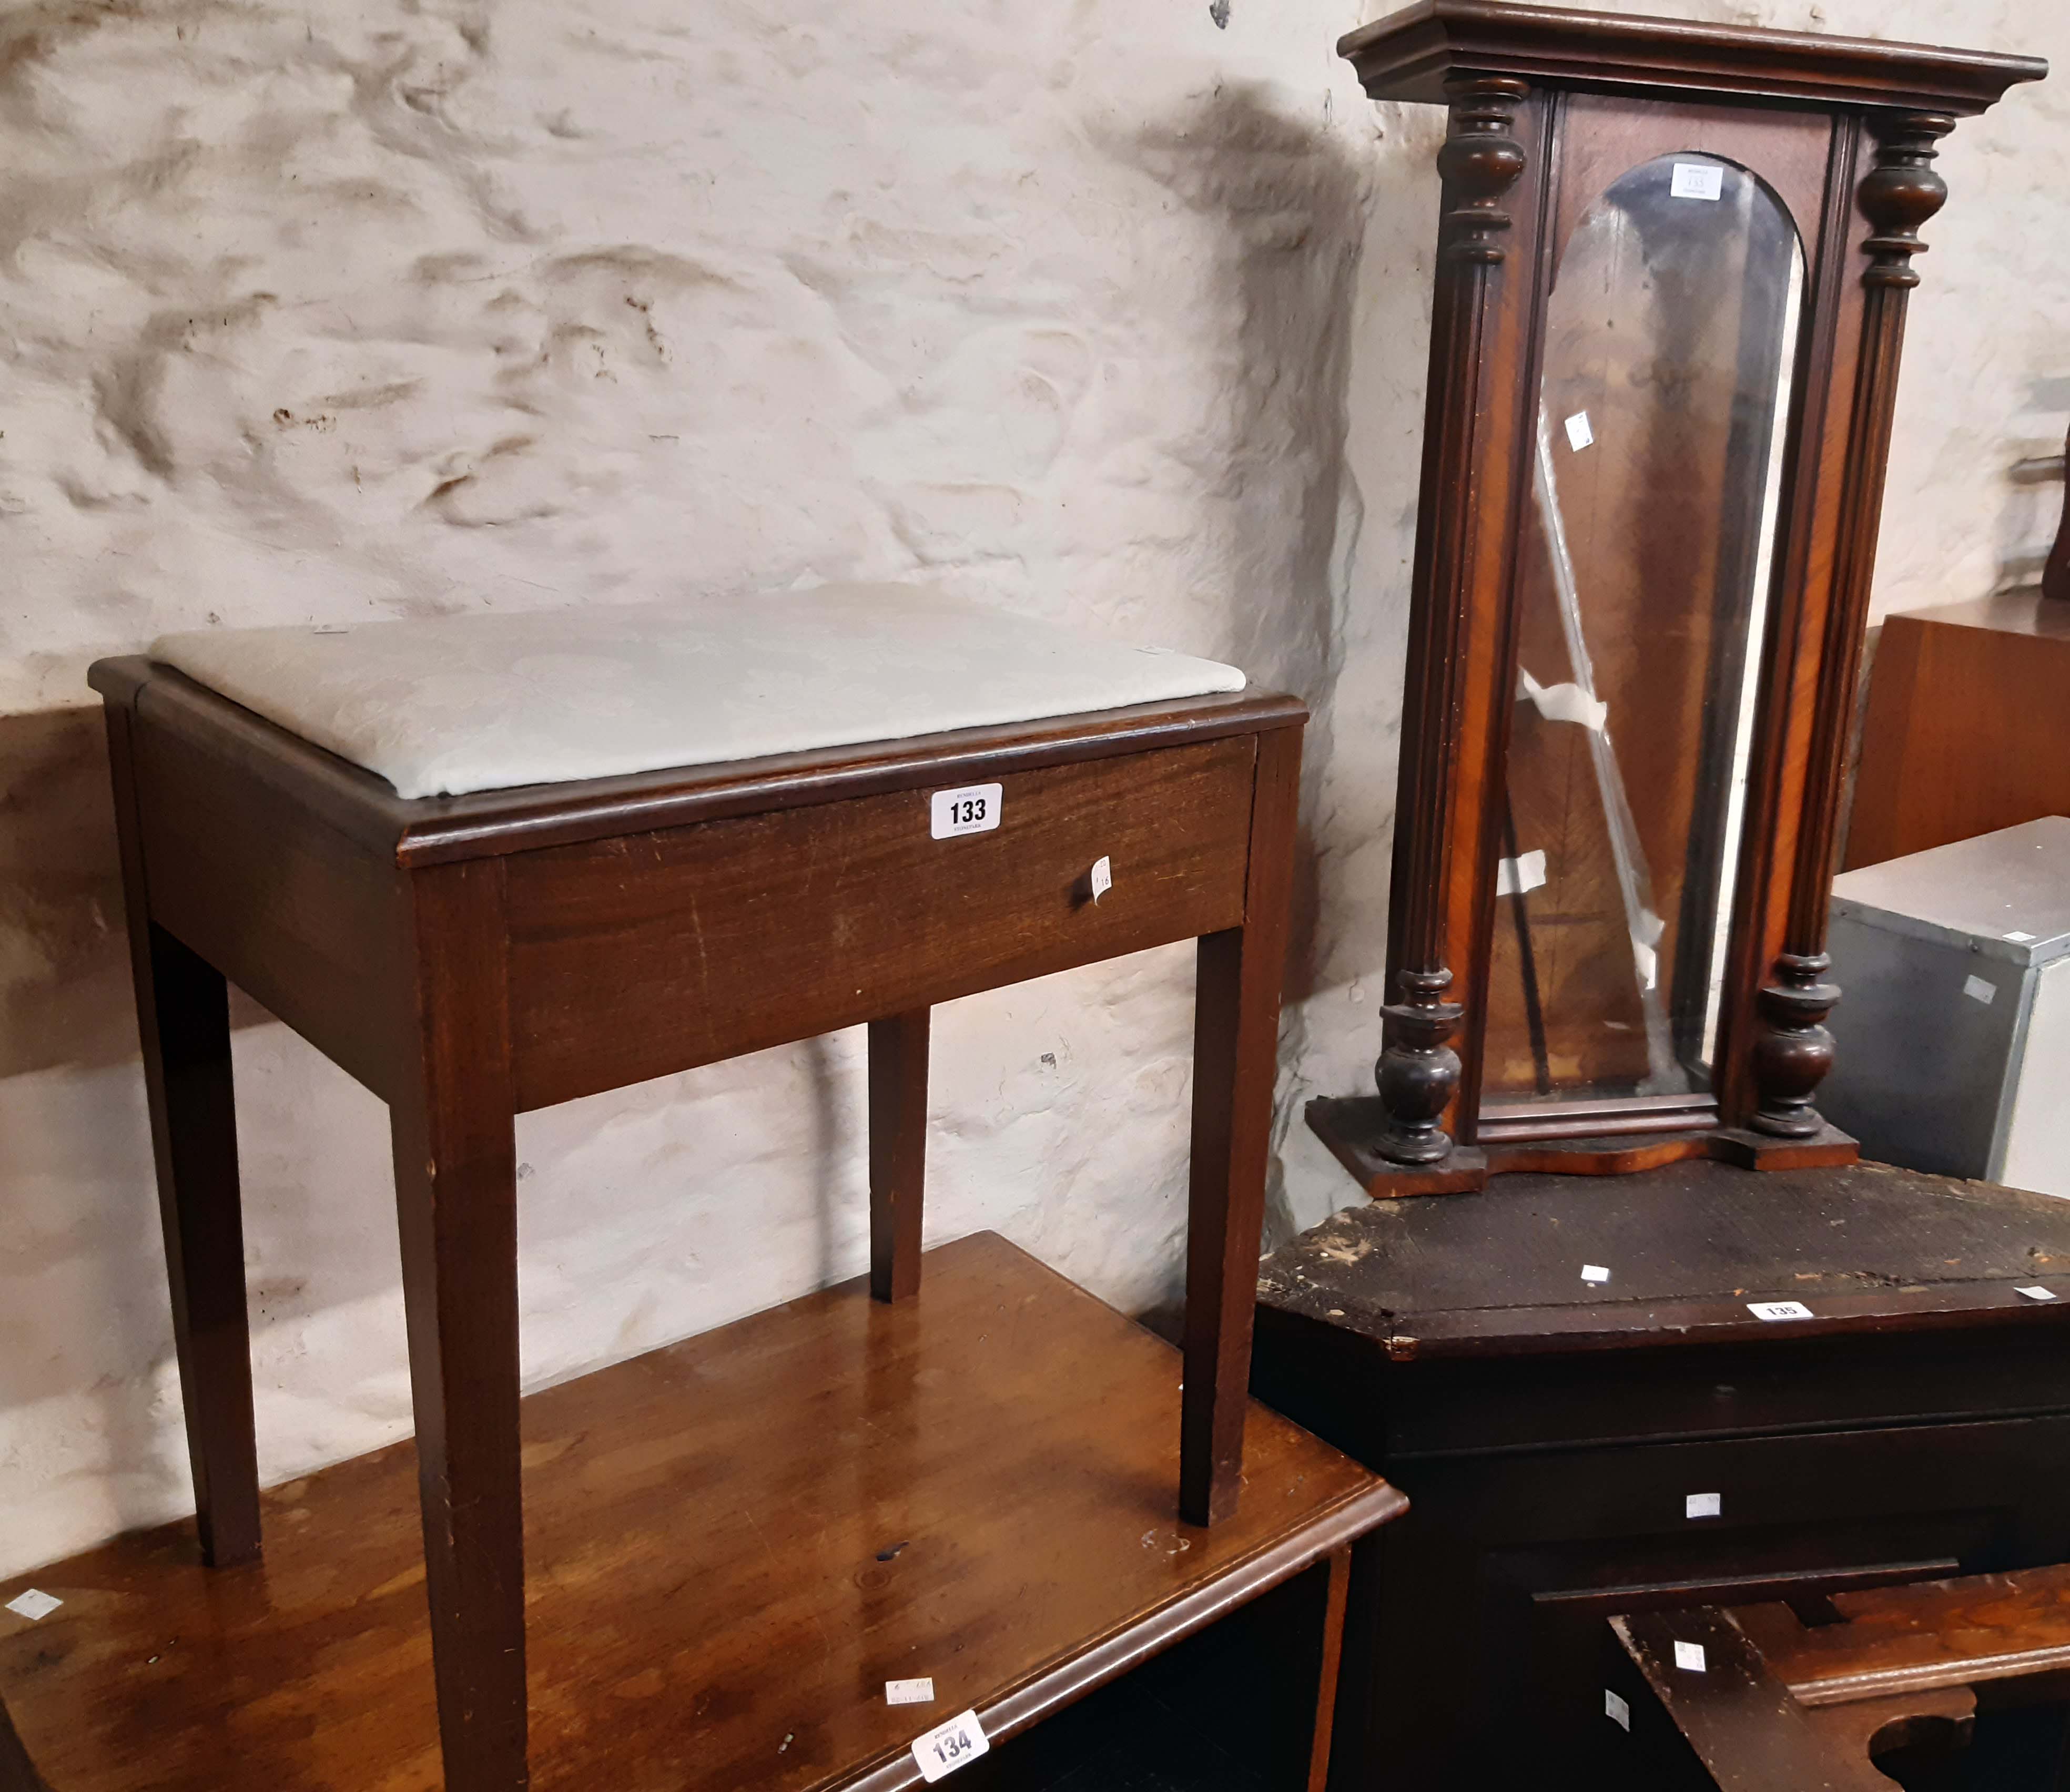 A 20th Century locker piano stool - sold with a Vienna regulator wall clock case - incomplete